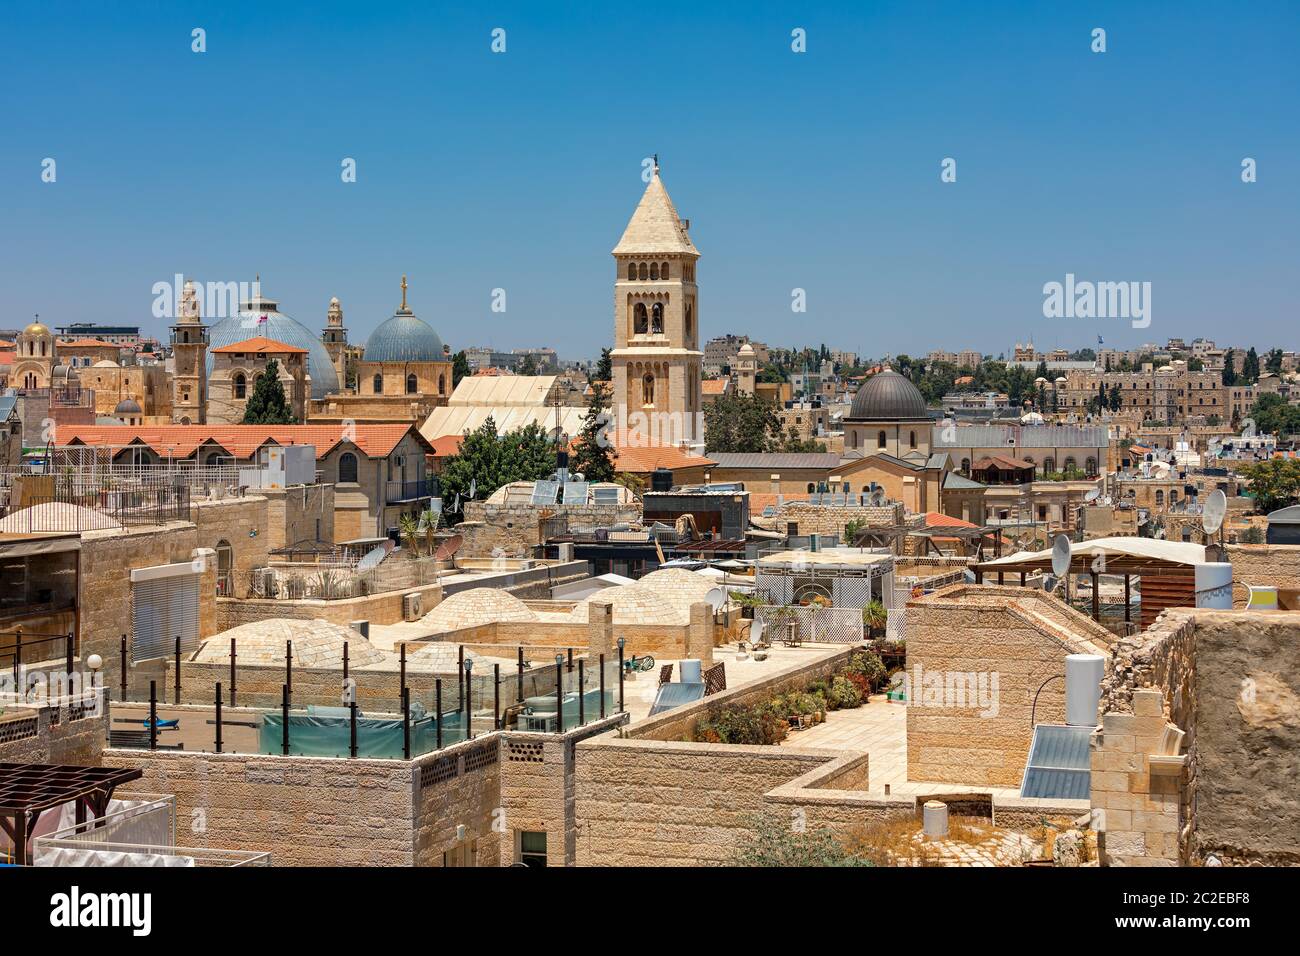 Domes and belfries among typical  stone buildings and rooftops under blue sky in Old City of Jerusalem, Israel. Stock Photo